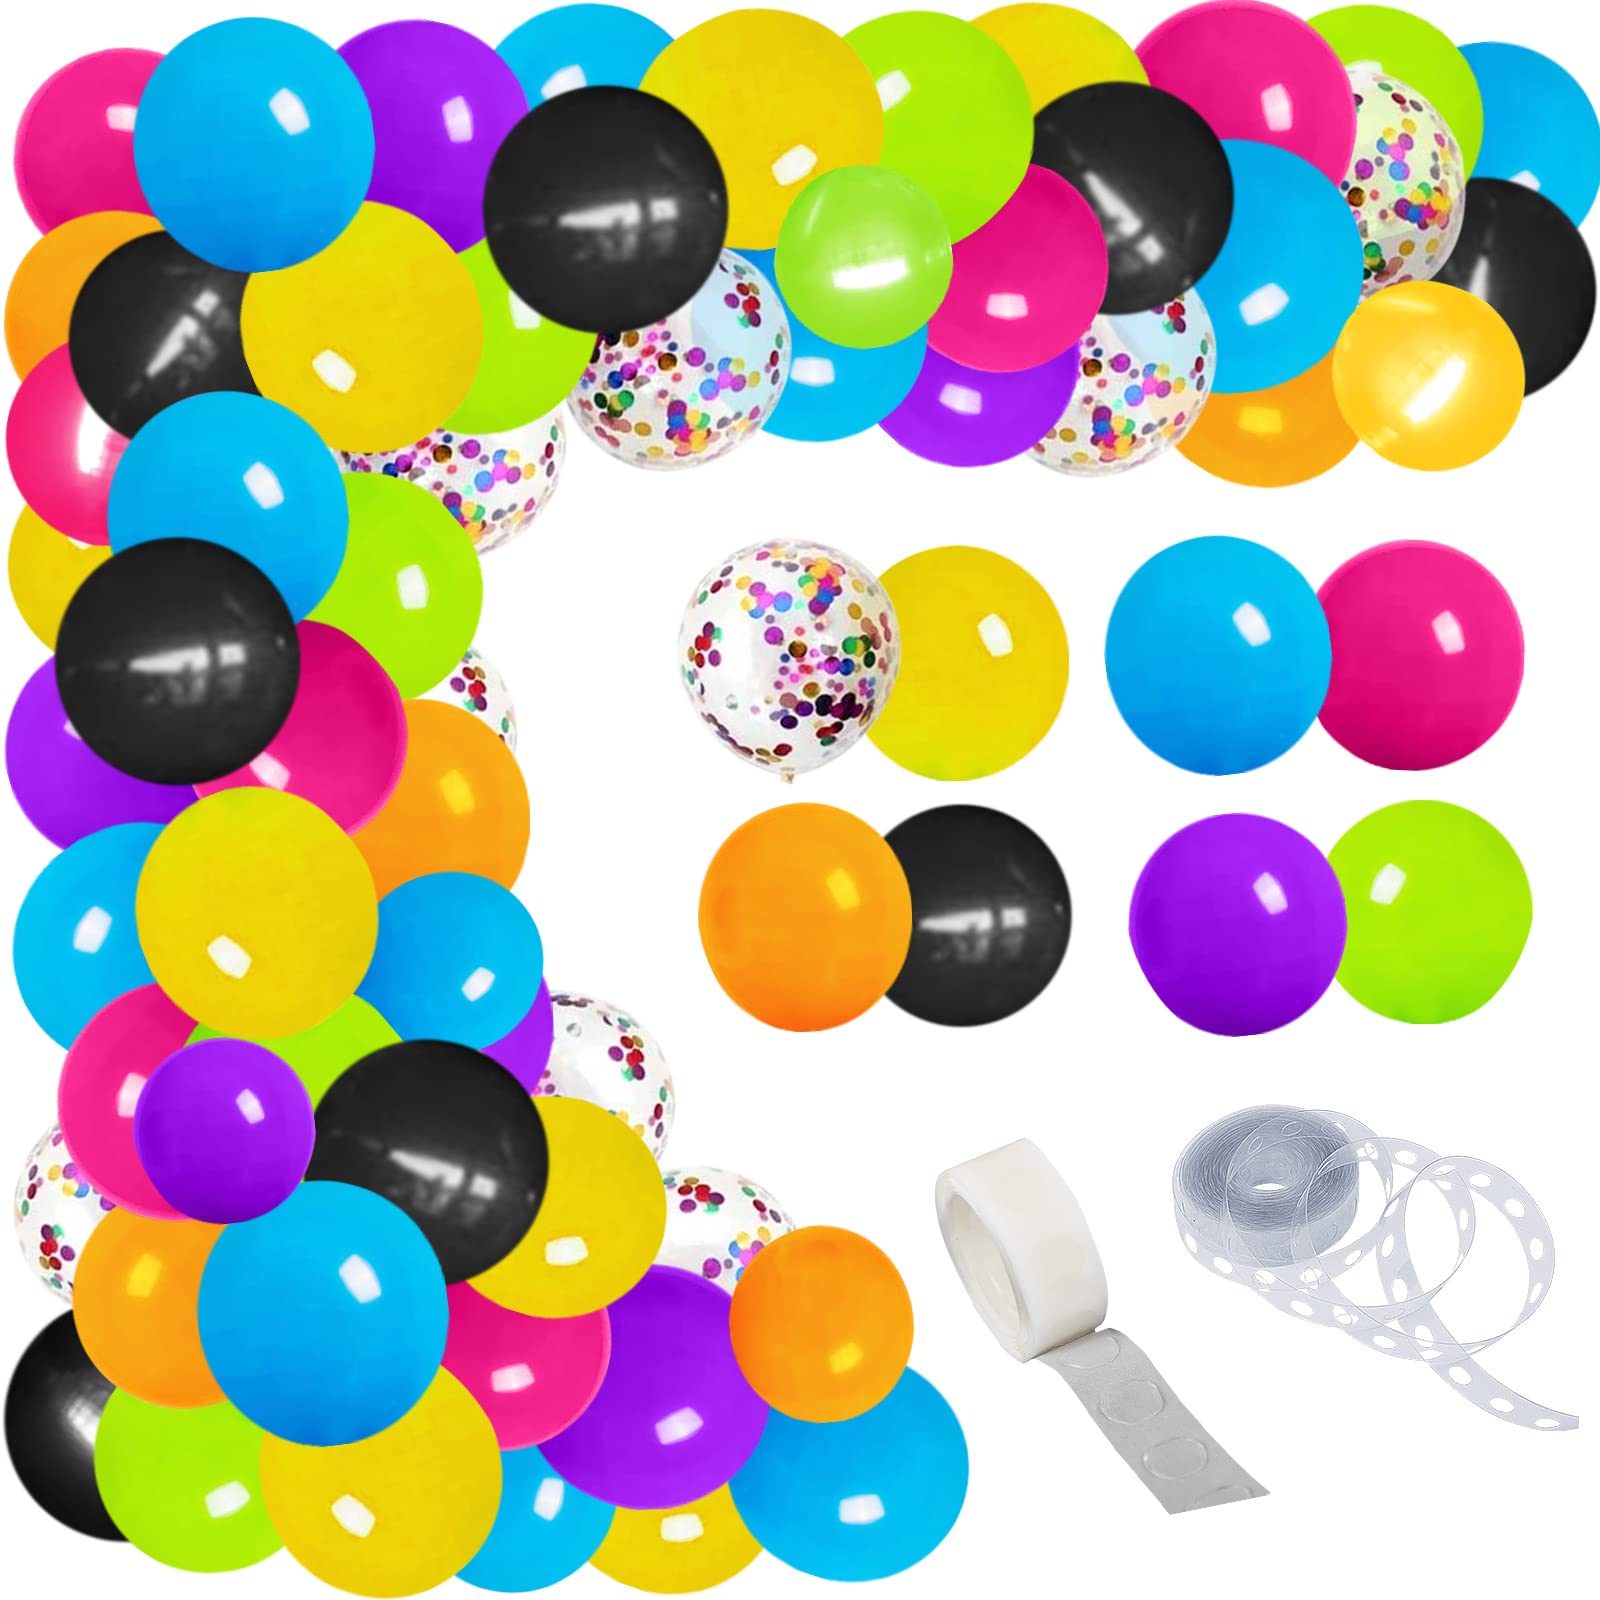 Mua 90s 80s 70s 60s 50s Theme Party Decorations Balloon Garland ...